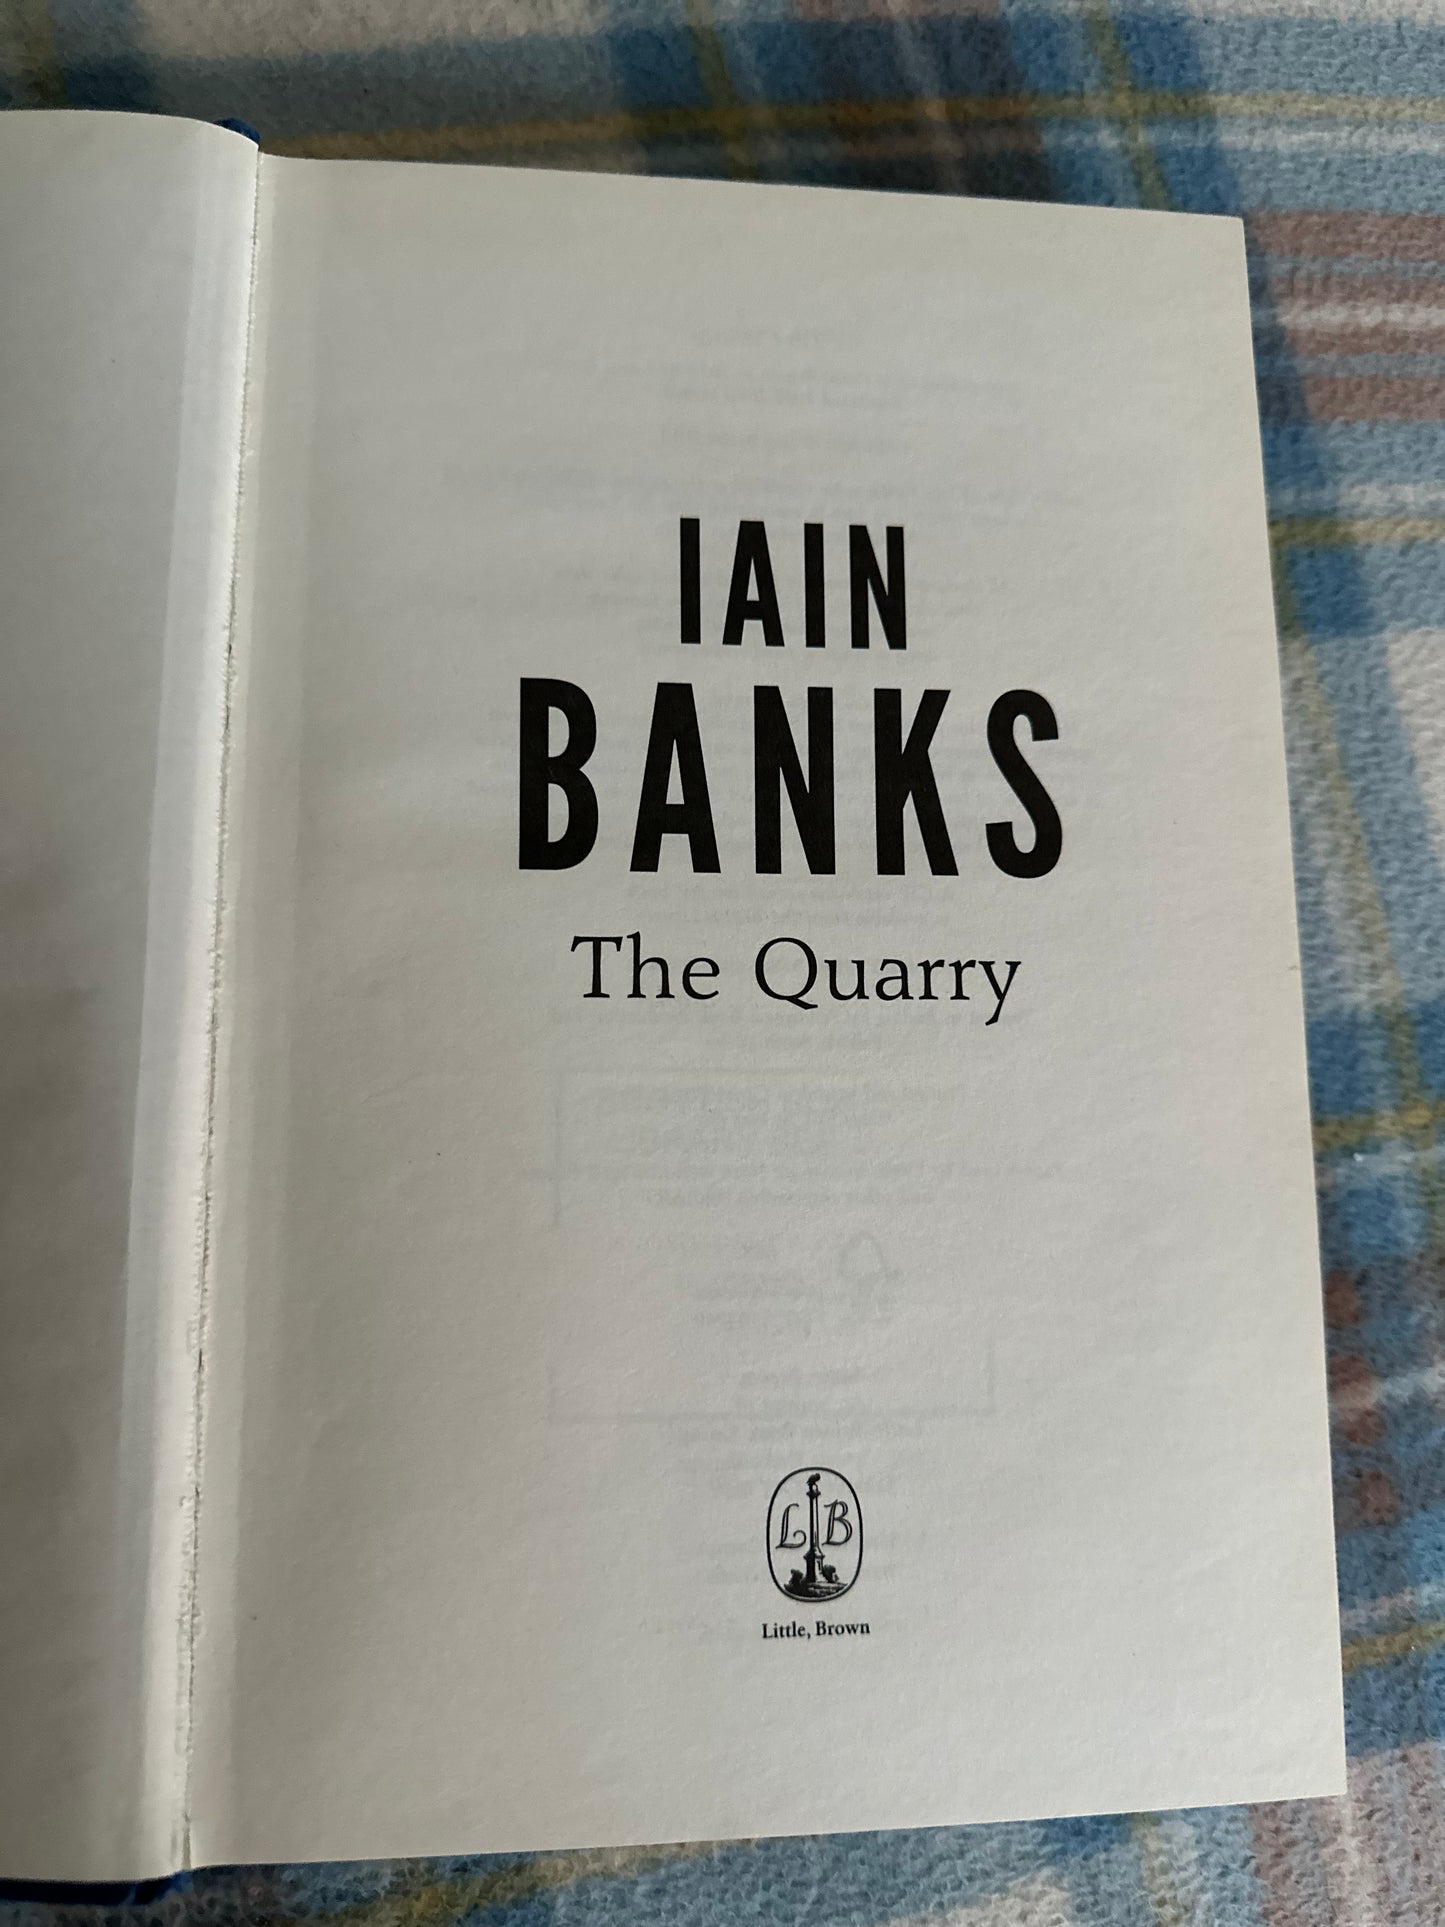 2013 The Quarry - Iain Banks(Little Brown)